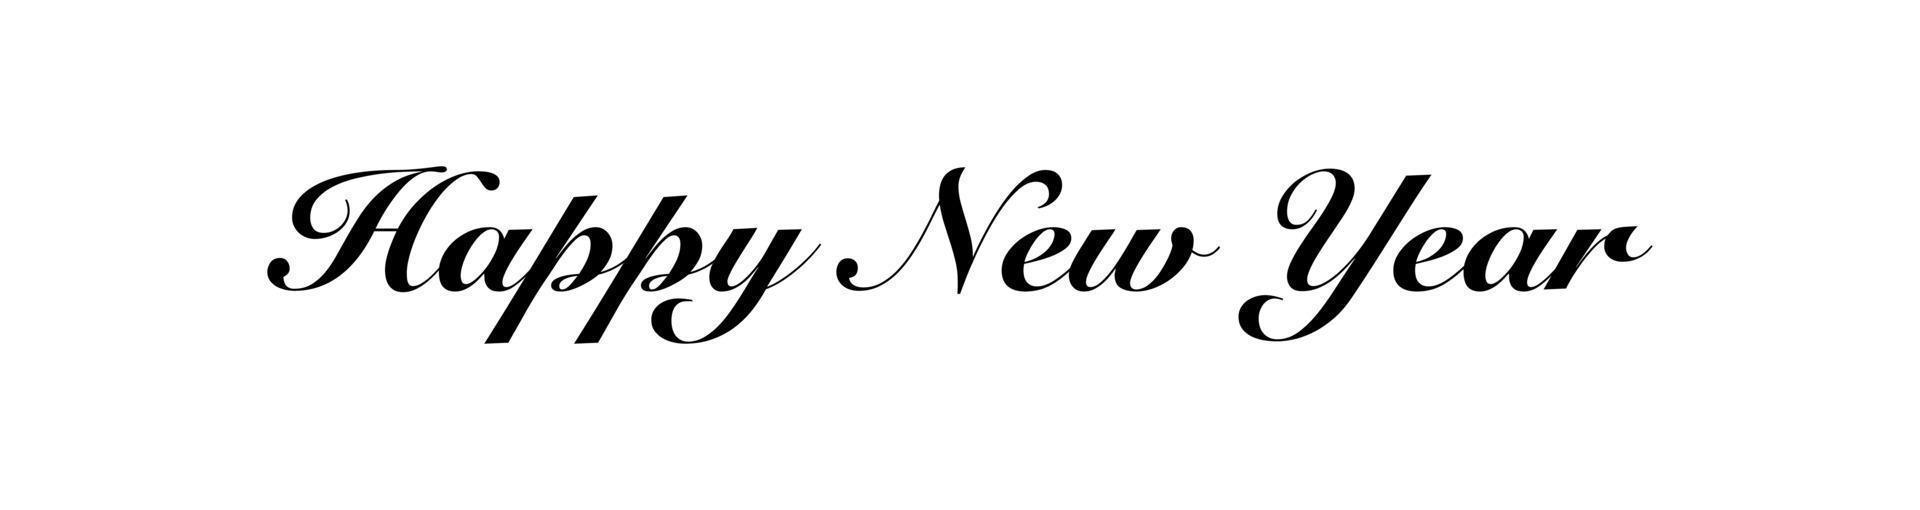 Happy new year black text on white background. vector